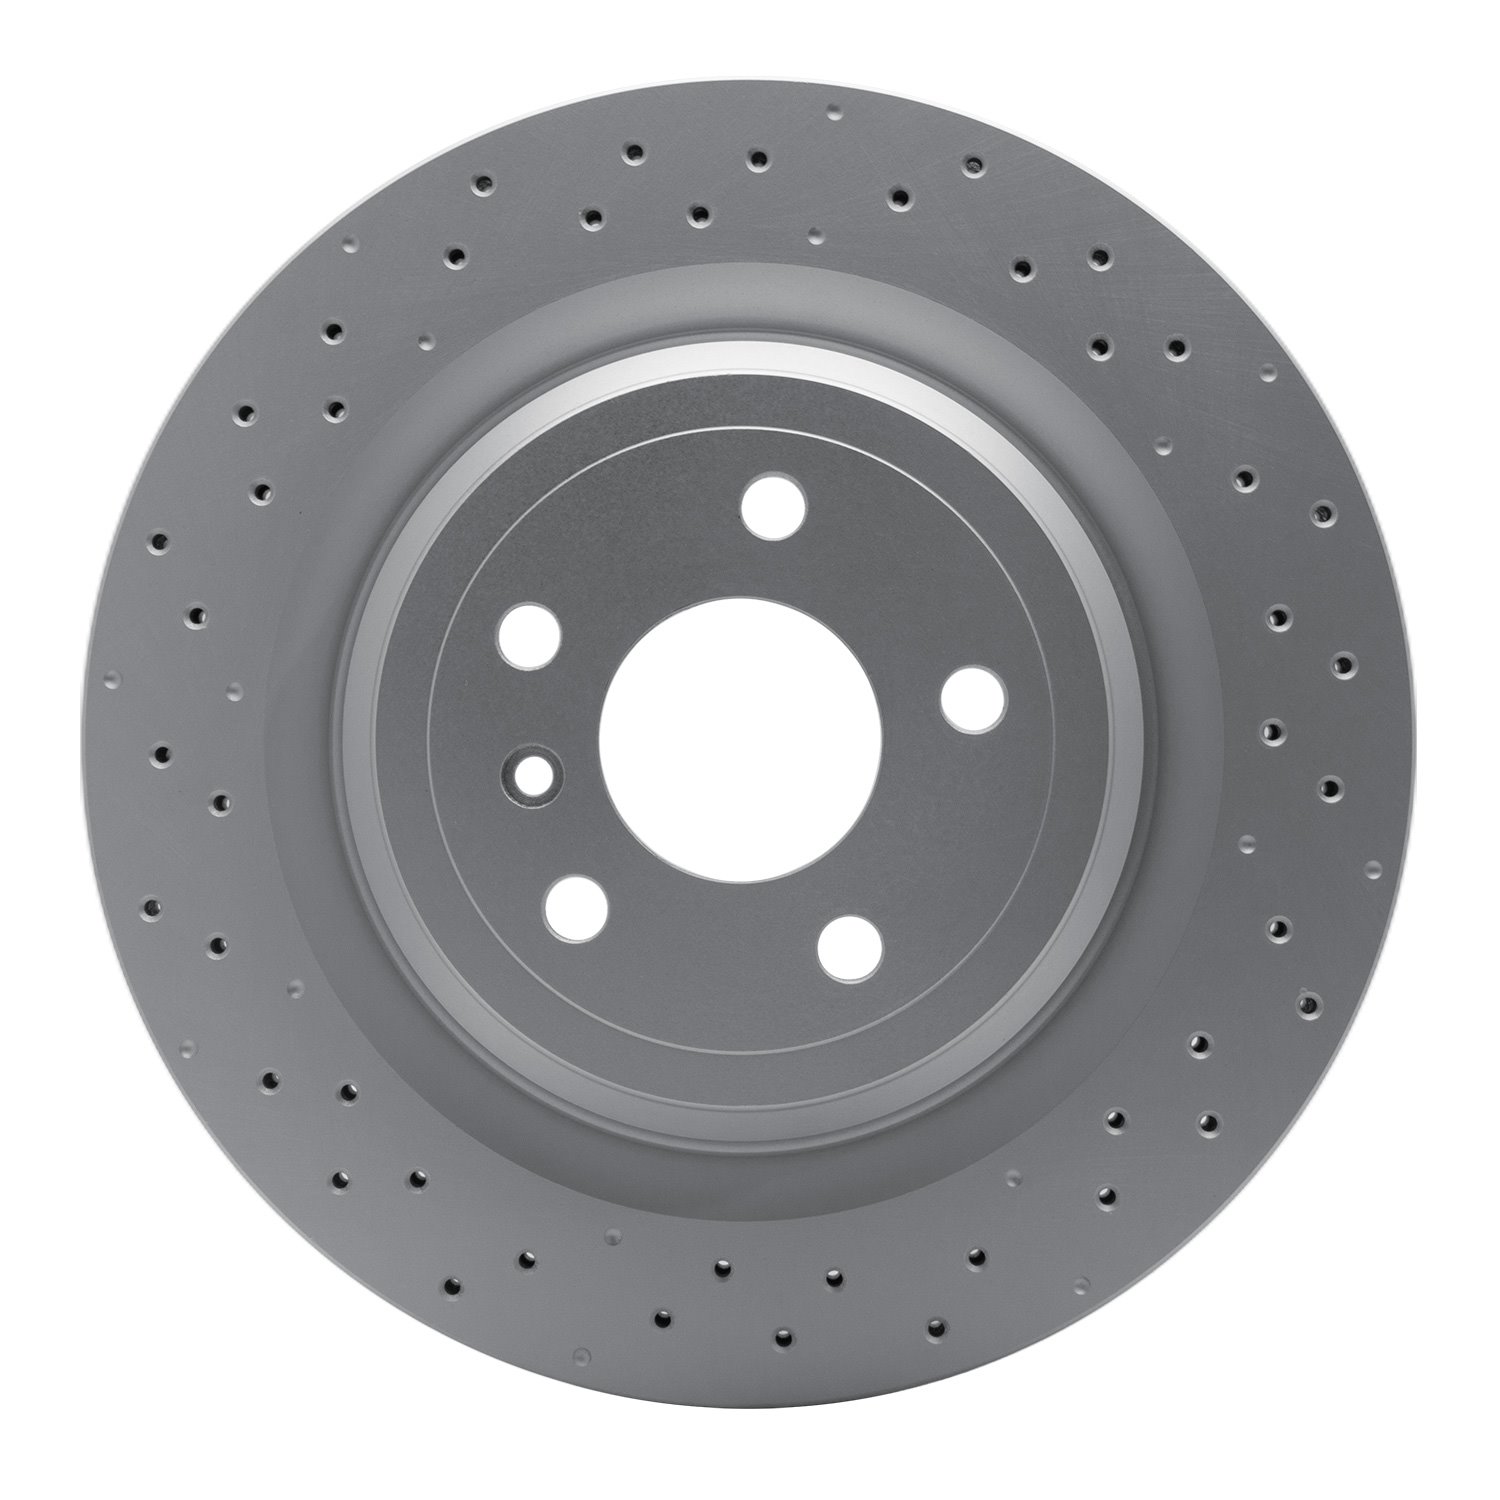 Hi-Carbon Alloy Geomet-Coated Drilled Rotor, 2012-2015 Mercedes-Benz, Position: Rear